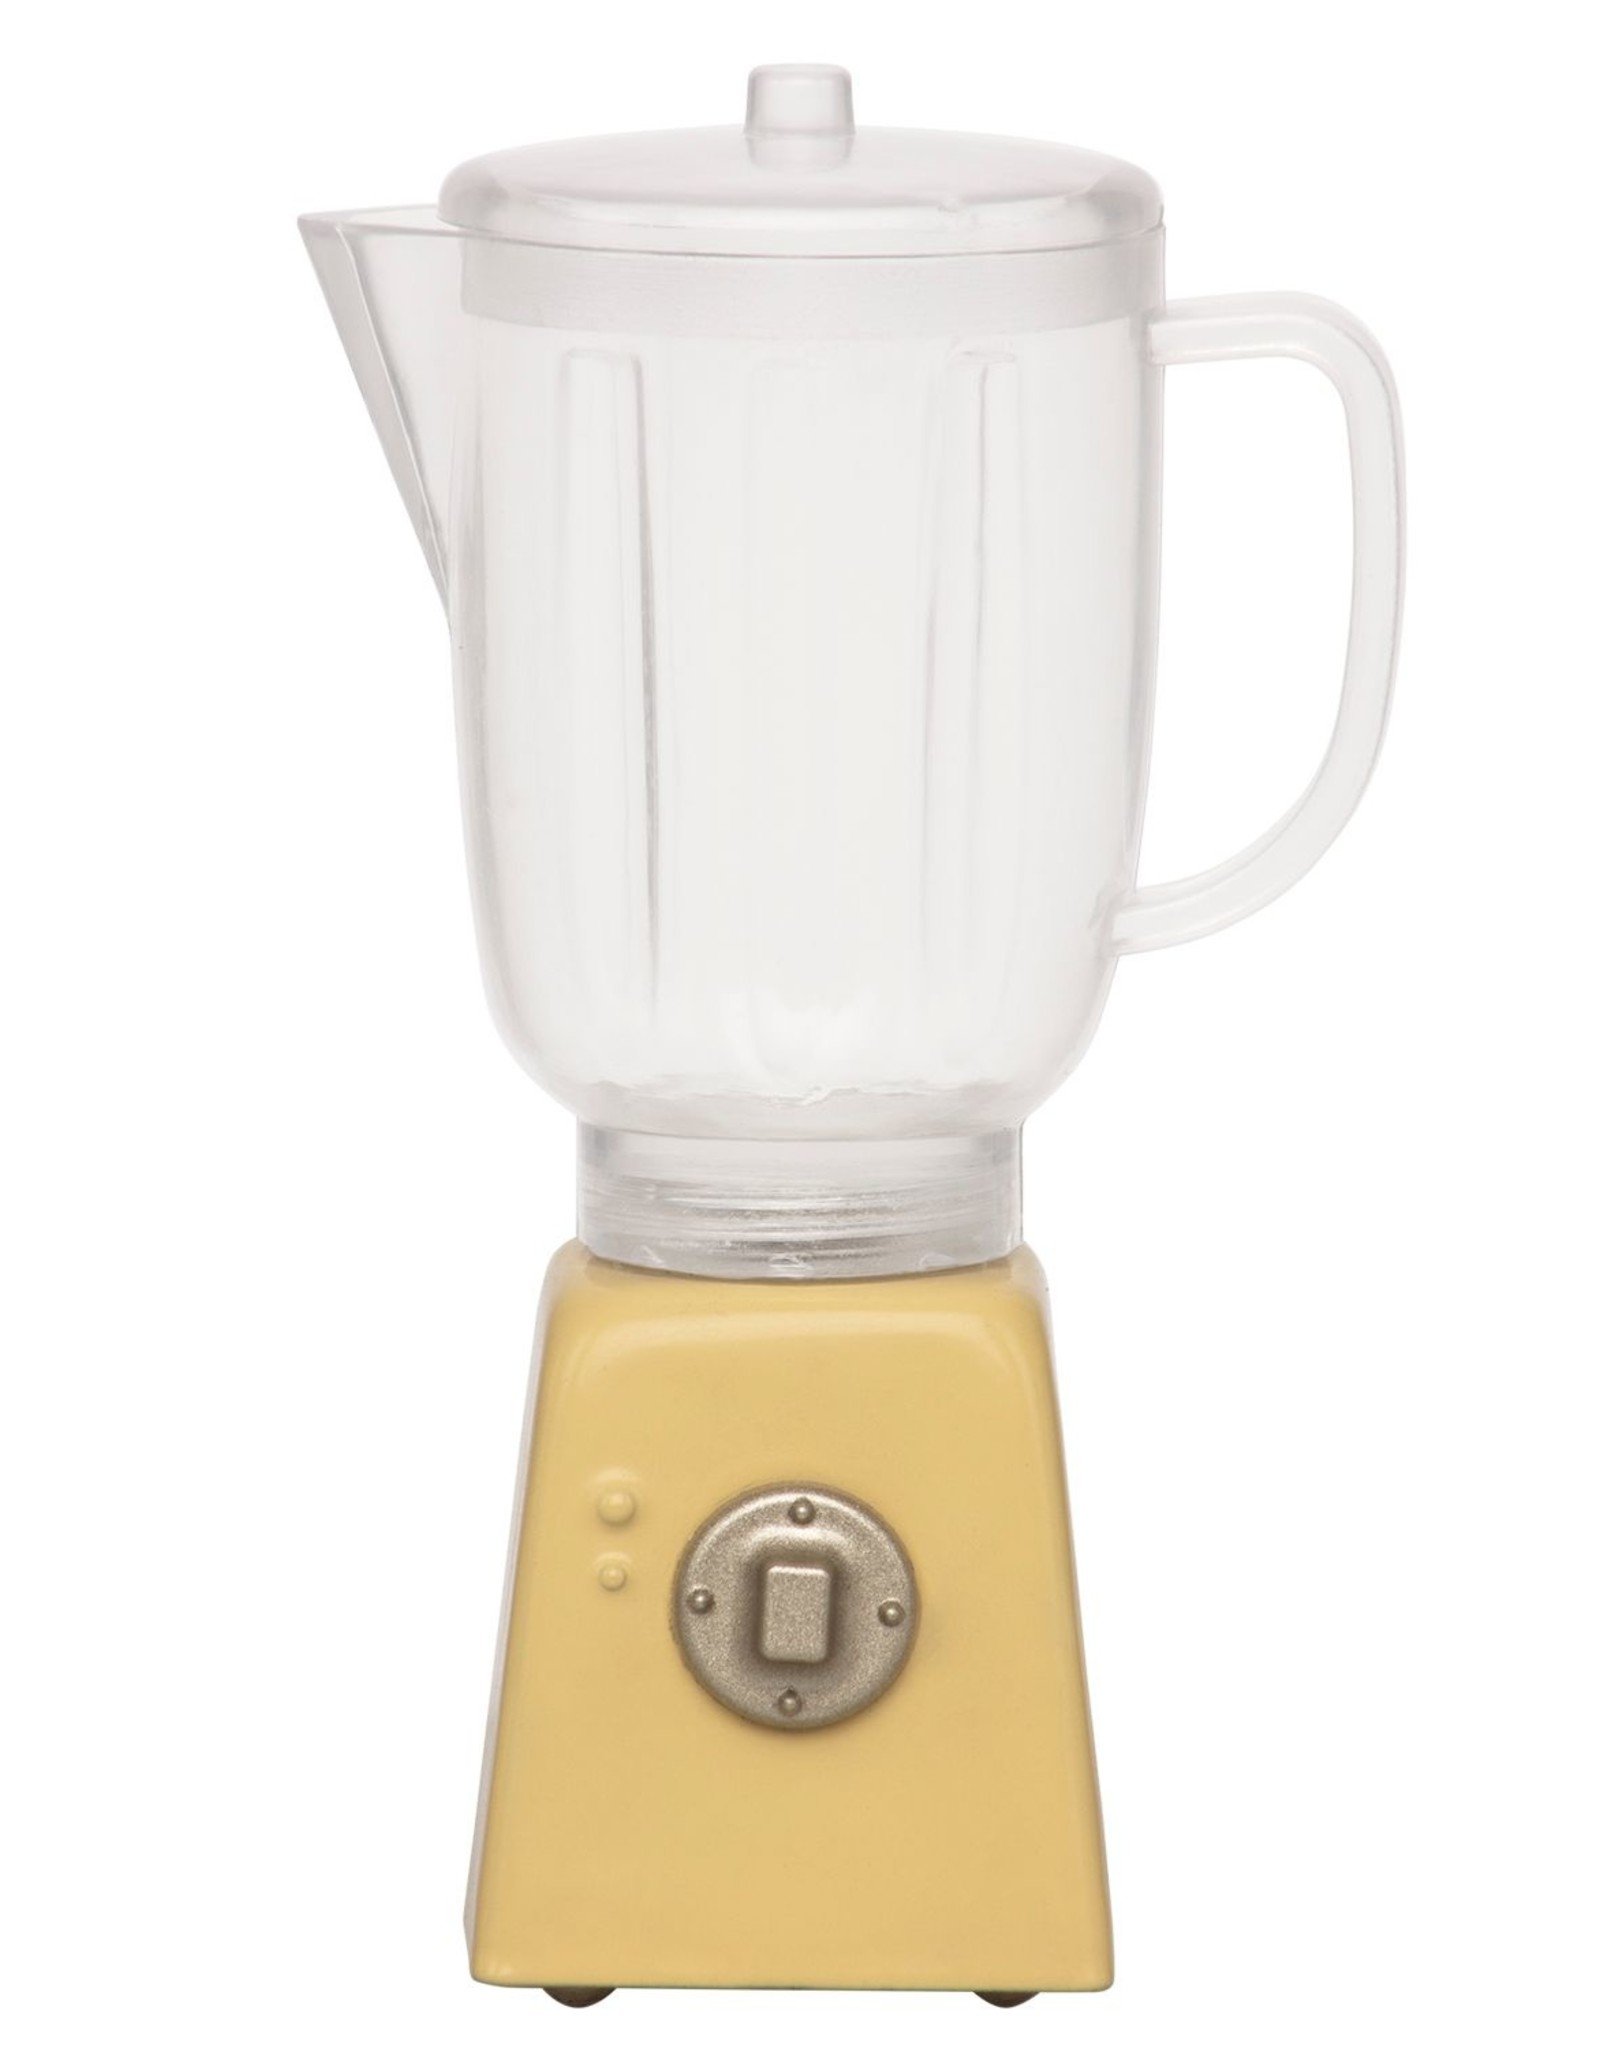 miniature blender- yellow - The Little Things - The Little Things